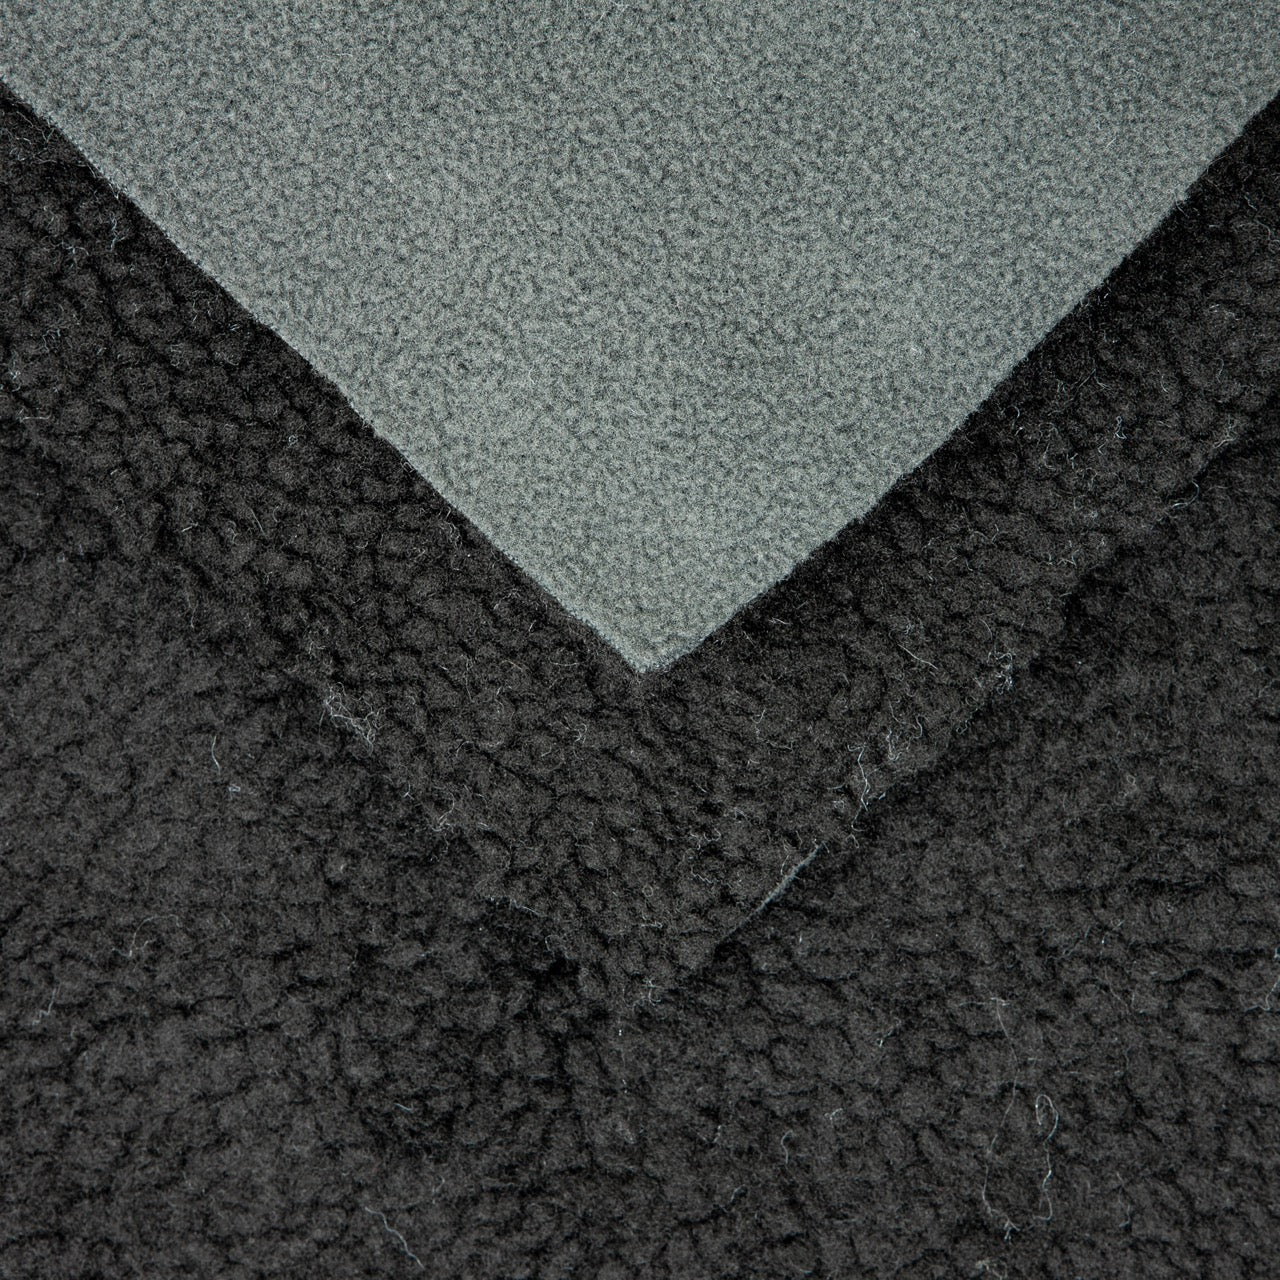 Bonded Sherpa Pile Lining - Black / Charcoal (detail)